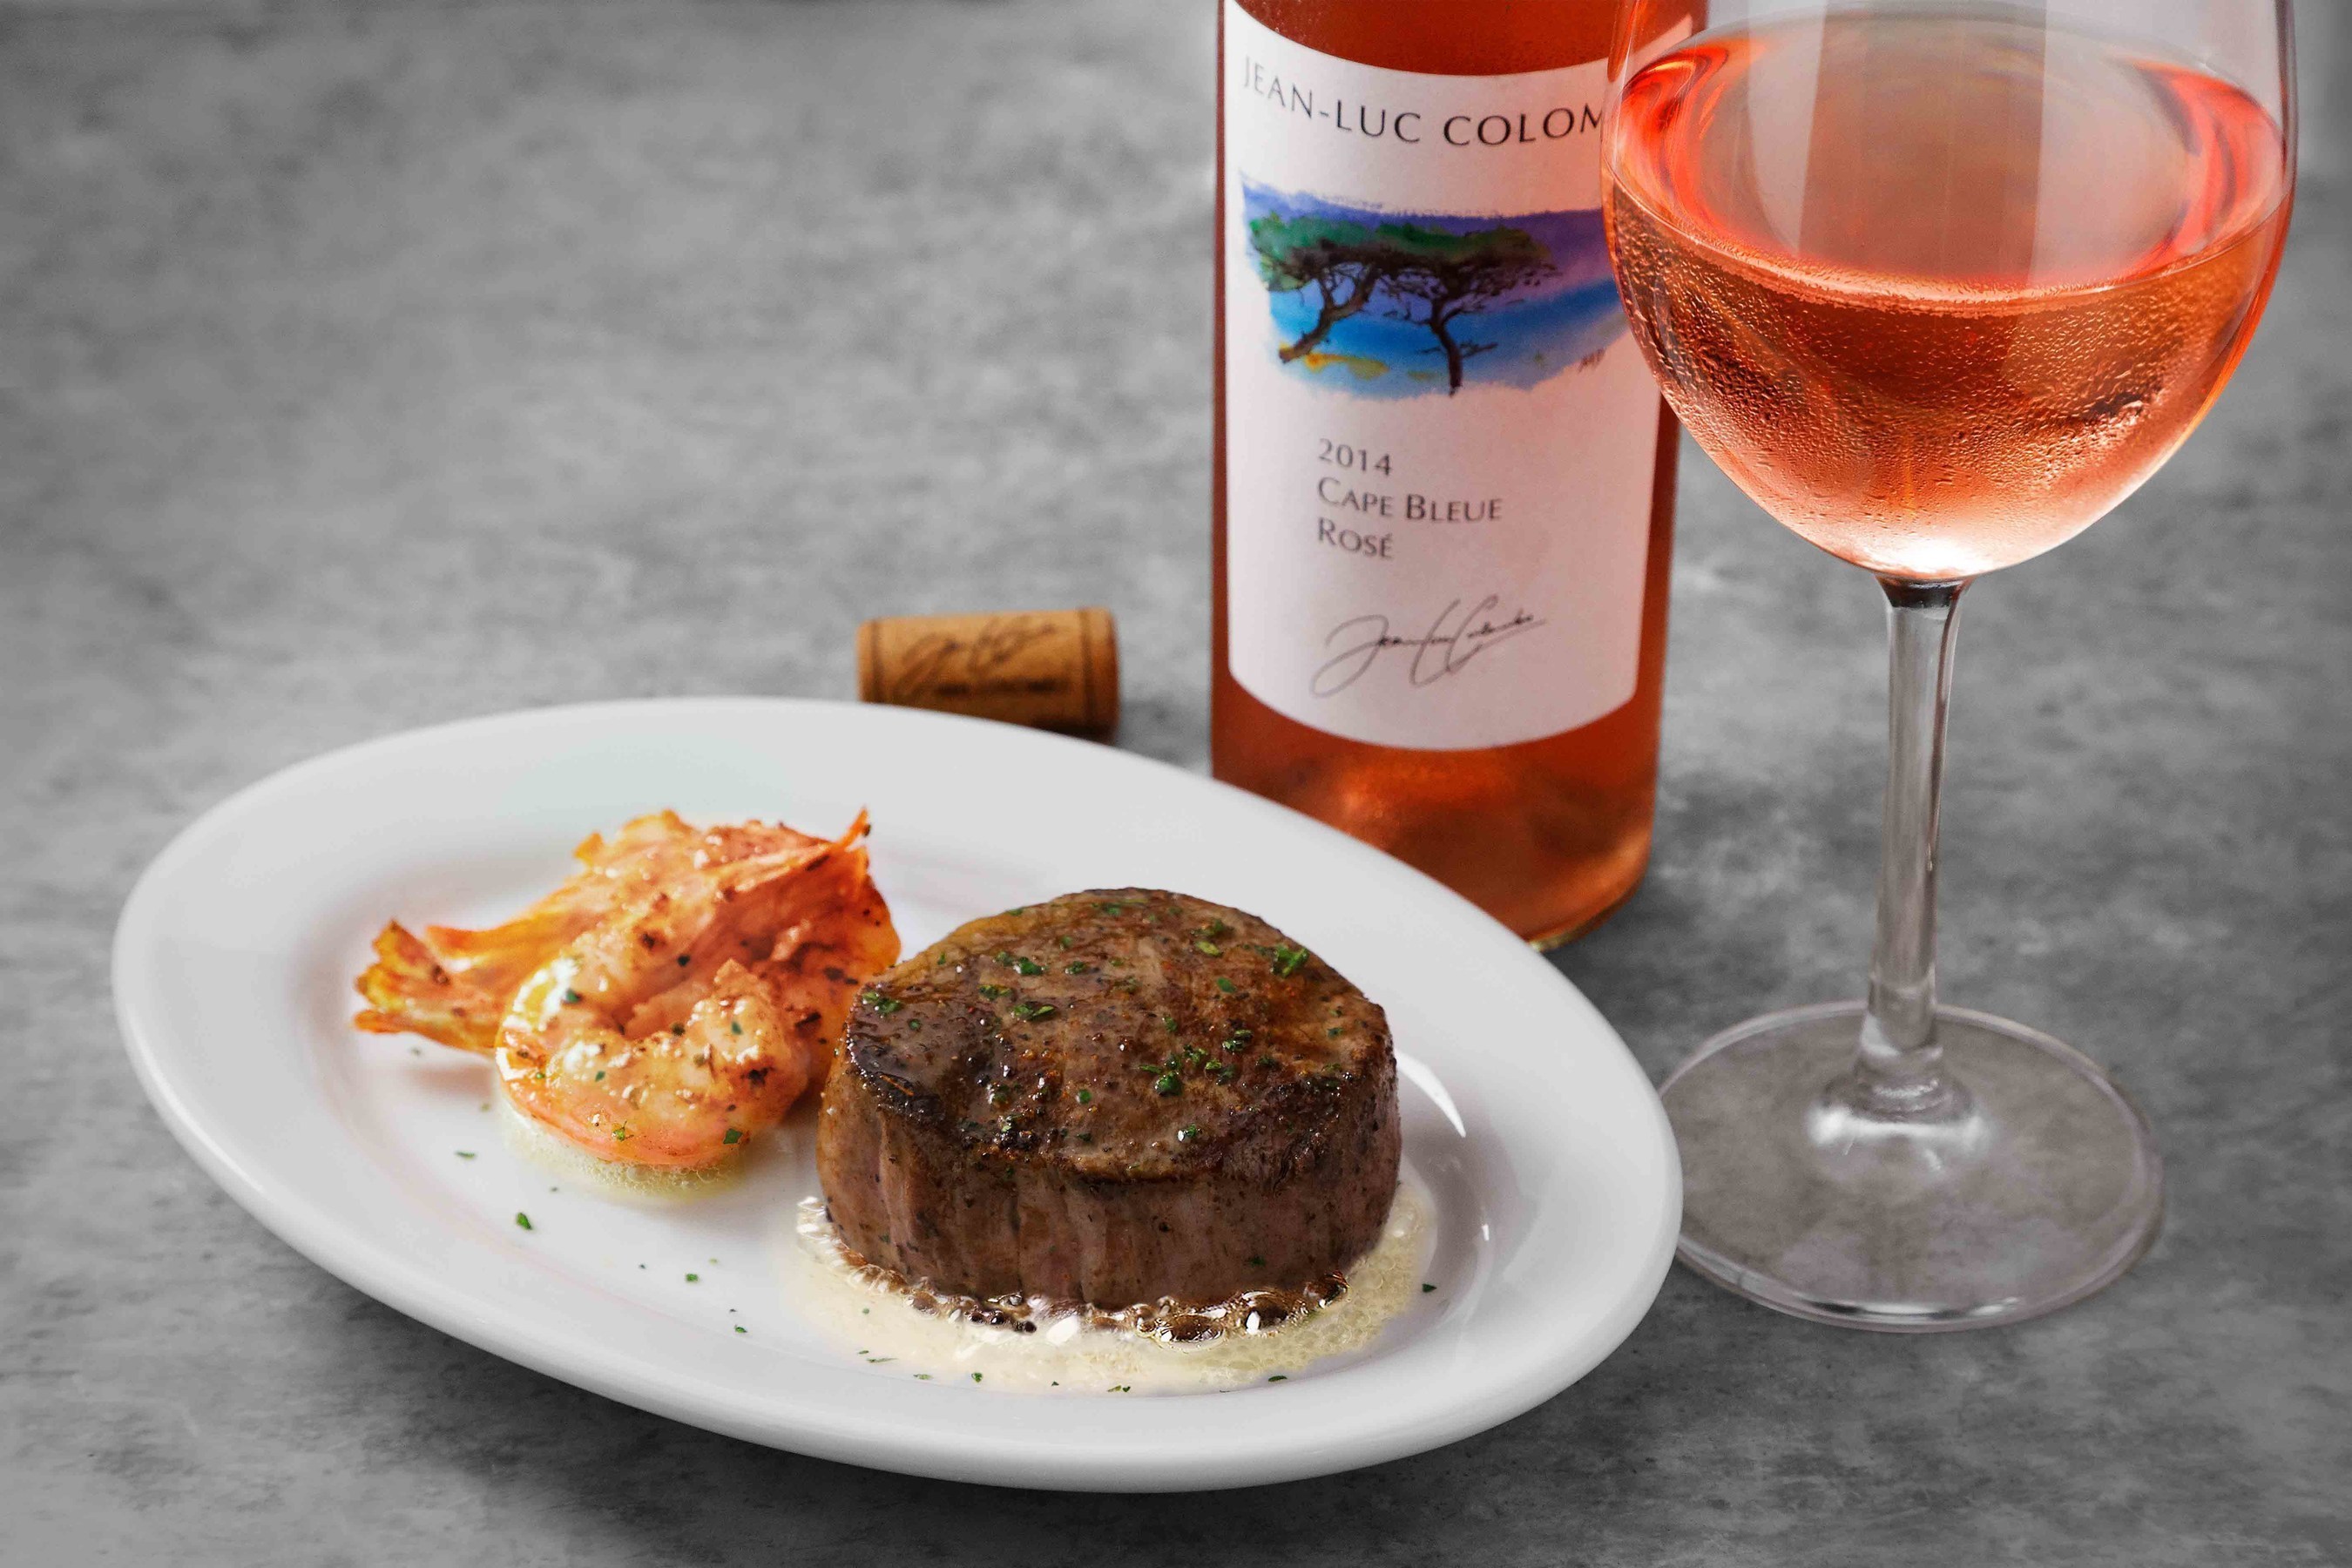 Join Ruth's Chris Steak House in celebrating the Filet Mignon with a special Filet and Rose pairing now through September 5. The special promotion includes a 6 oz. filet, served with three succulent shrimp paired with a glass of Rose for $30.